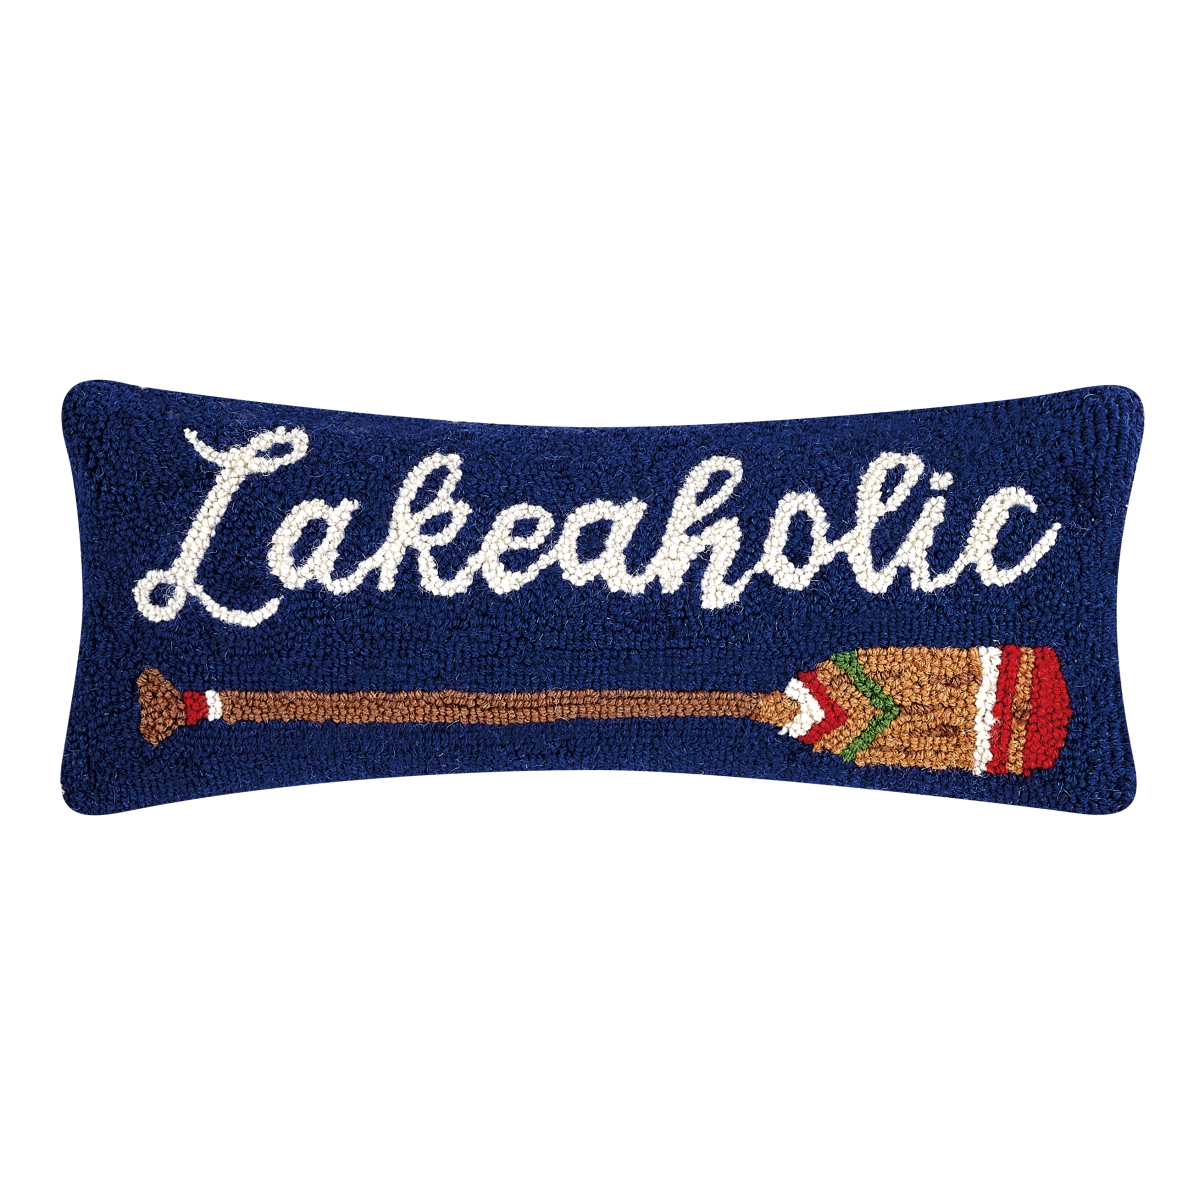 Picture of Peking Handicraft 30TG477C20OB 8 x 20 in. Lakeaholic Poly Filled Rectangle Hook Pillow